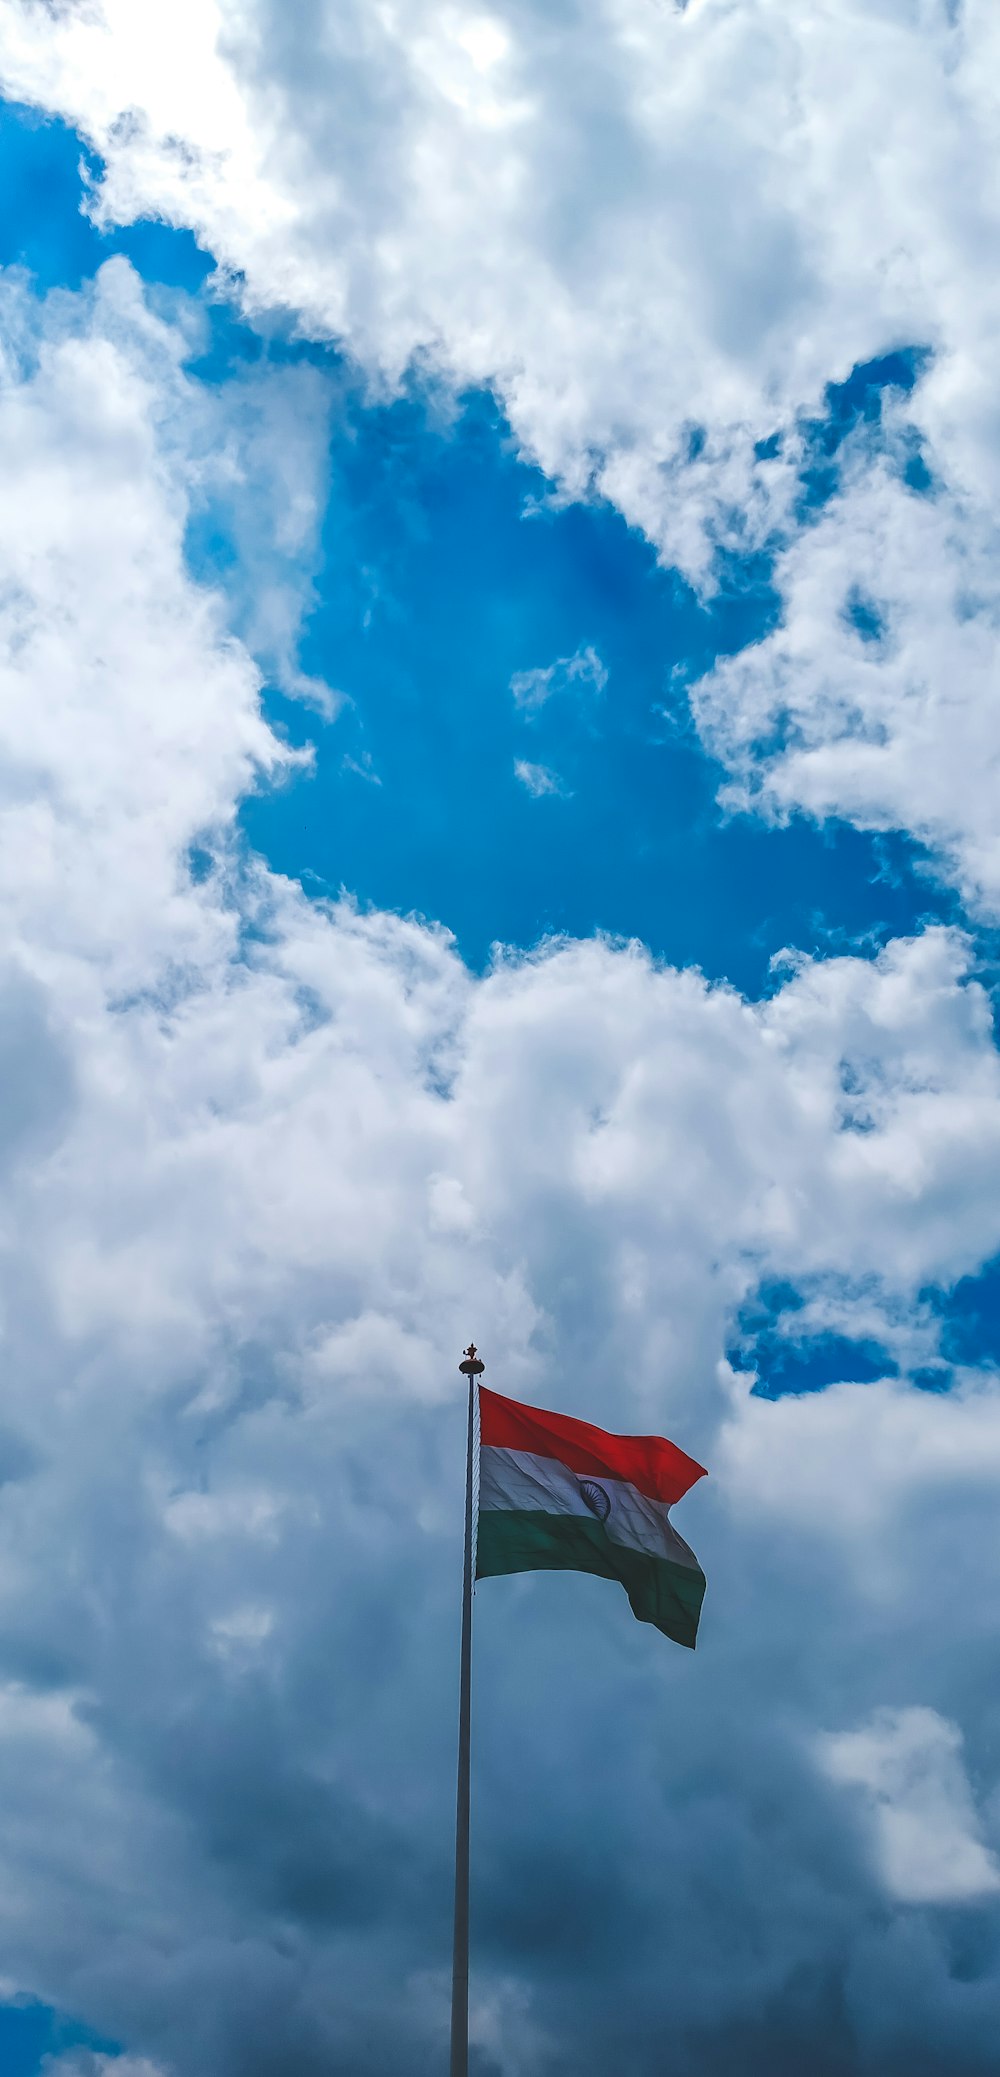 red and white flag under blue sky and white clouds during daytime